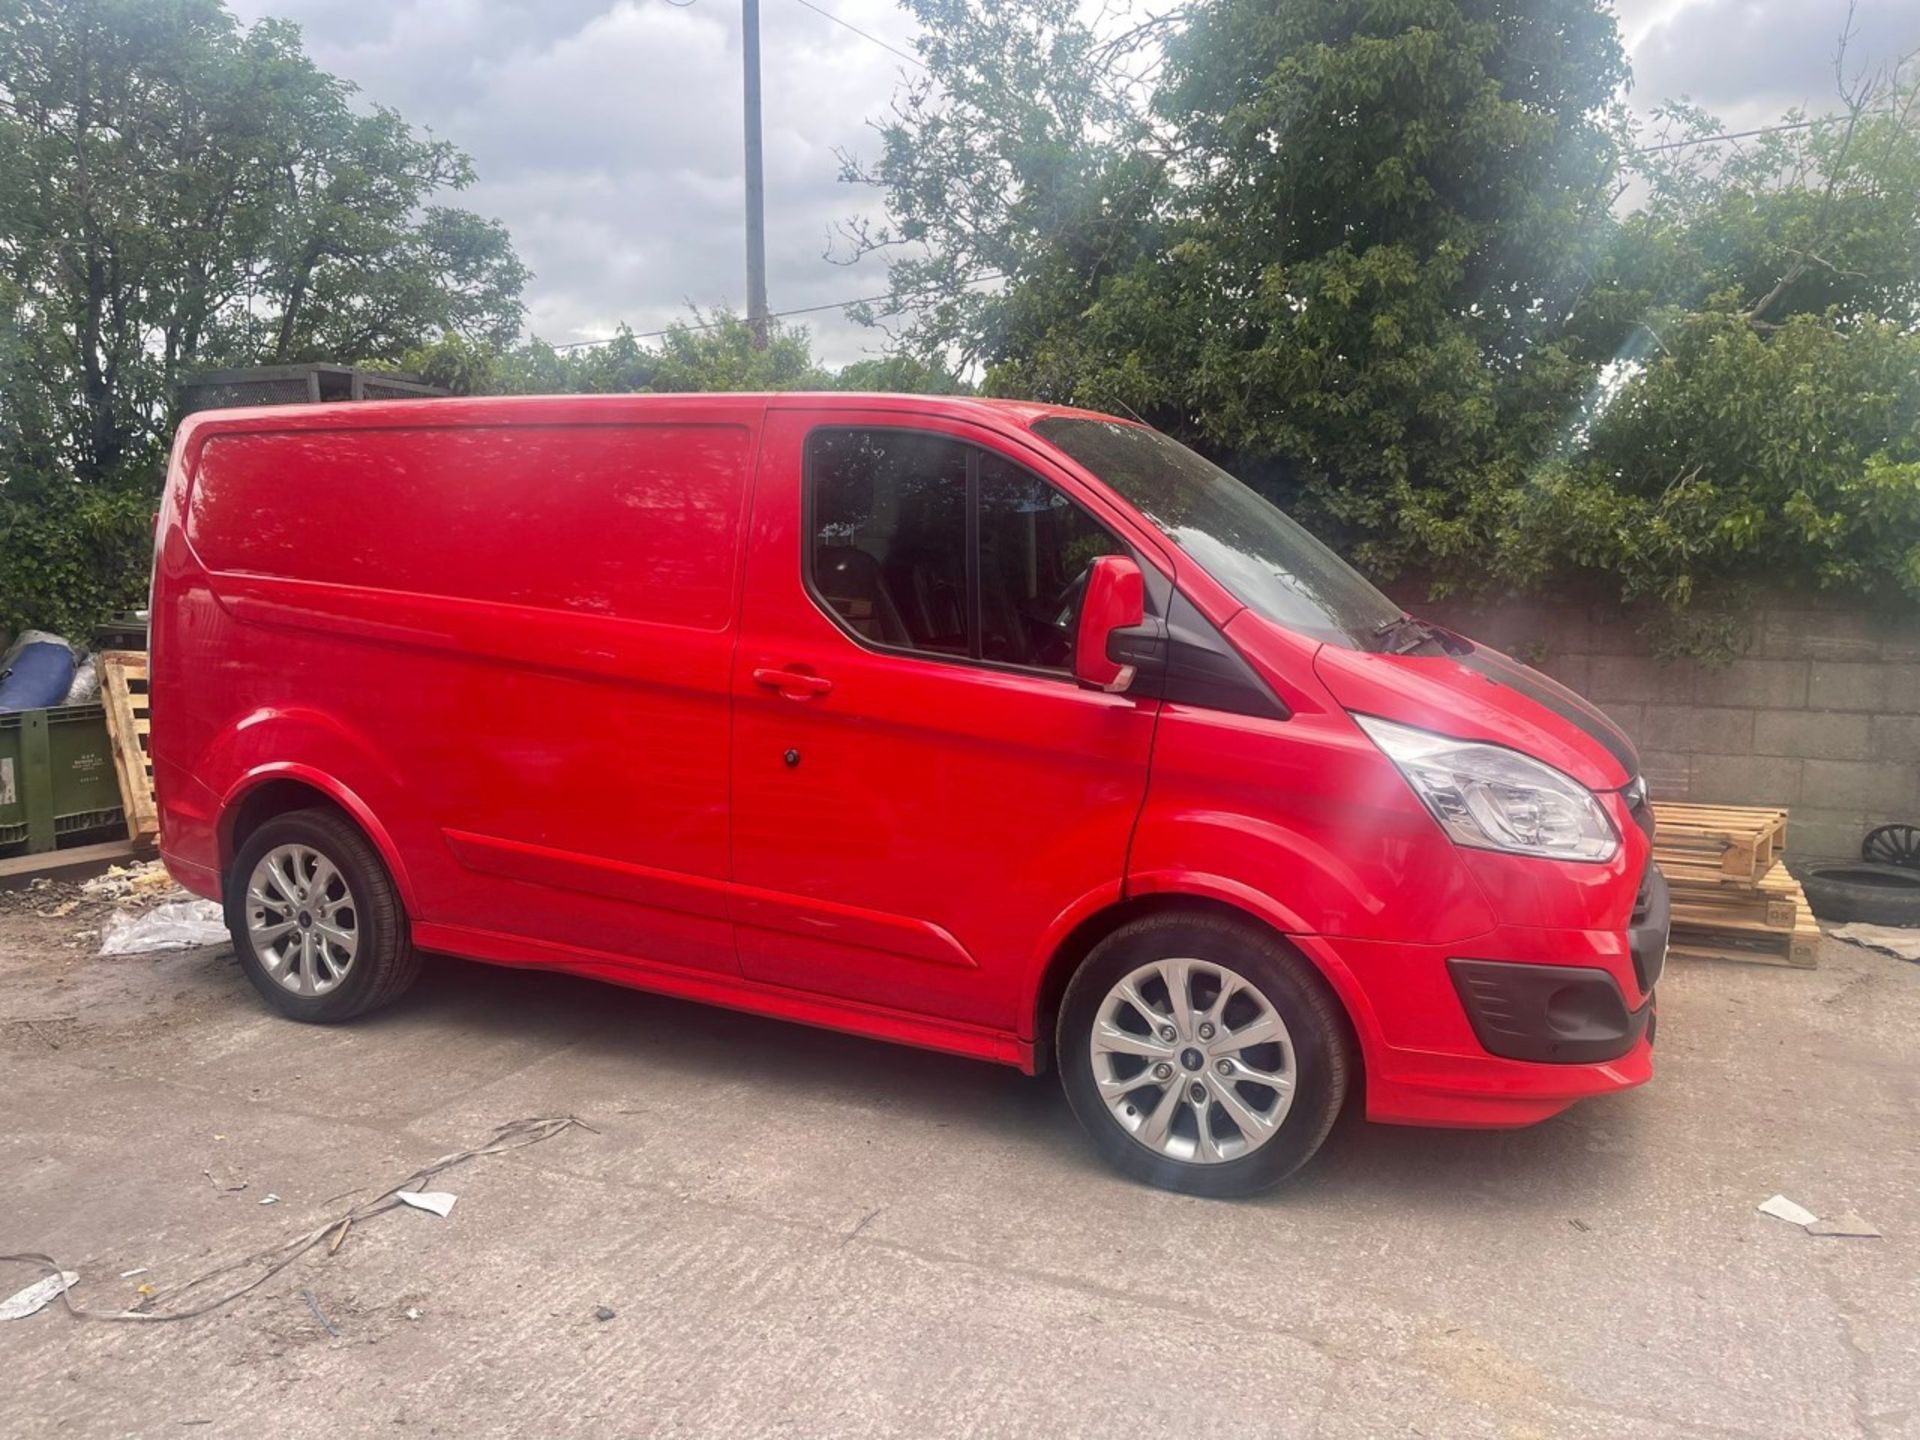 YT17 WJJ - FORD TRANSIT CUSTOM 290 L1 DIESEL FWD - 2.0 TDCi 170ps Low Roof Limited Van   Colour: Red